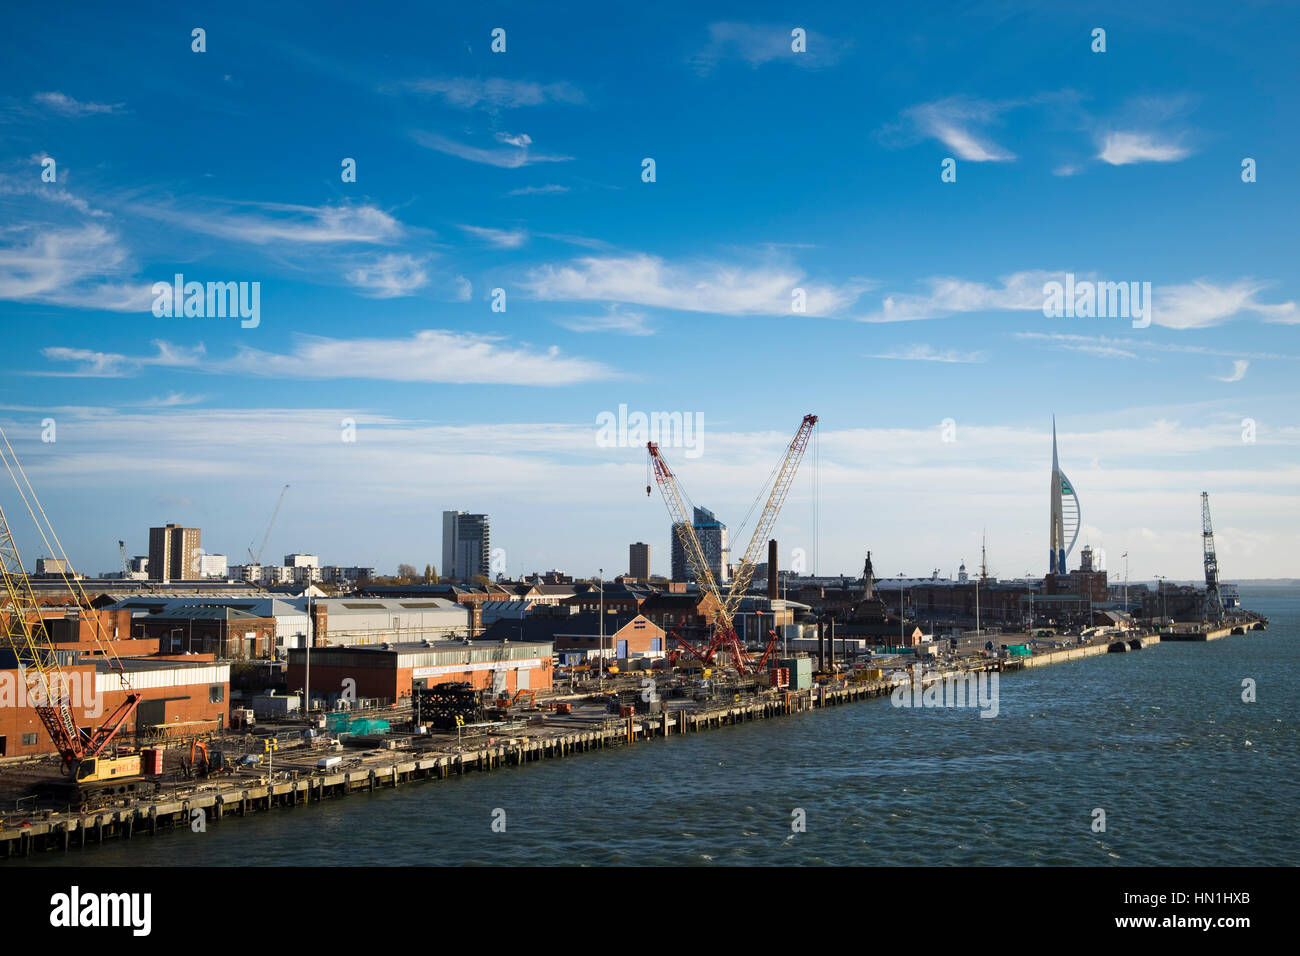 Portsmouth historic dockyard from the sea Stock Photo